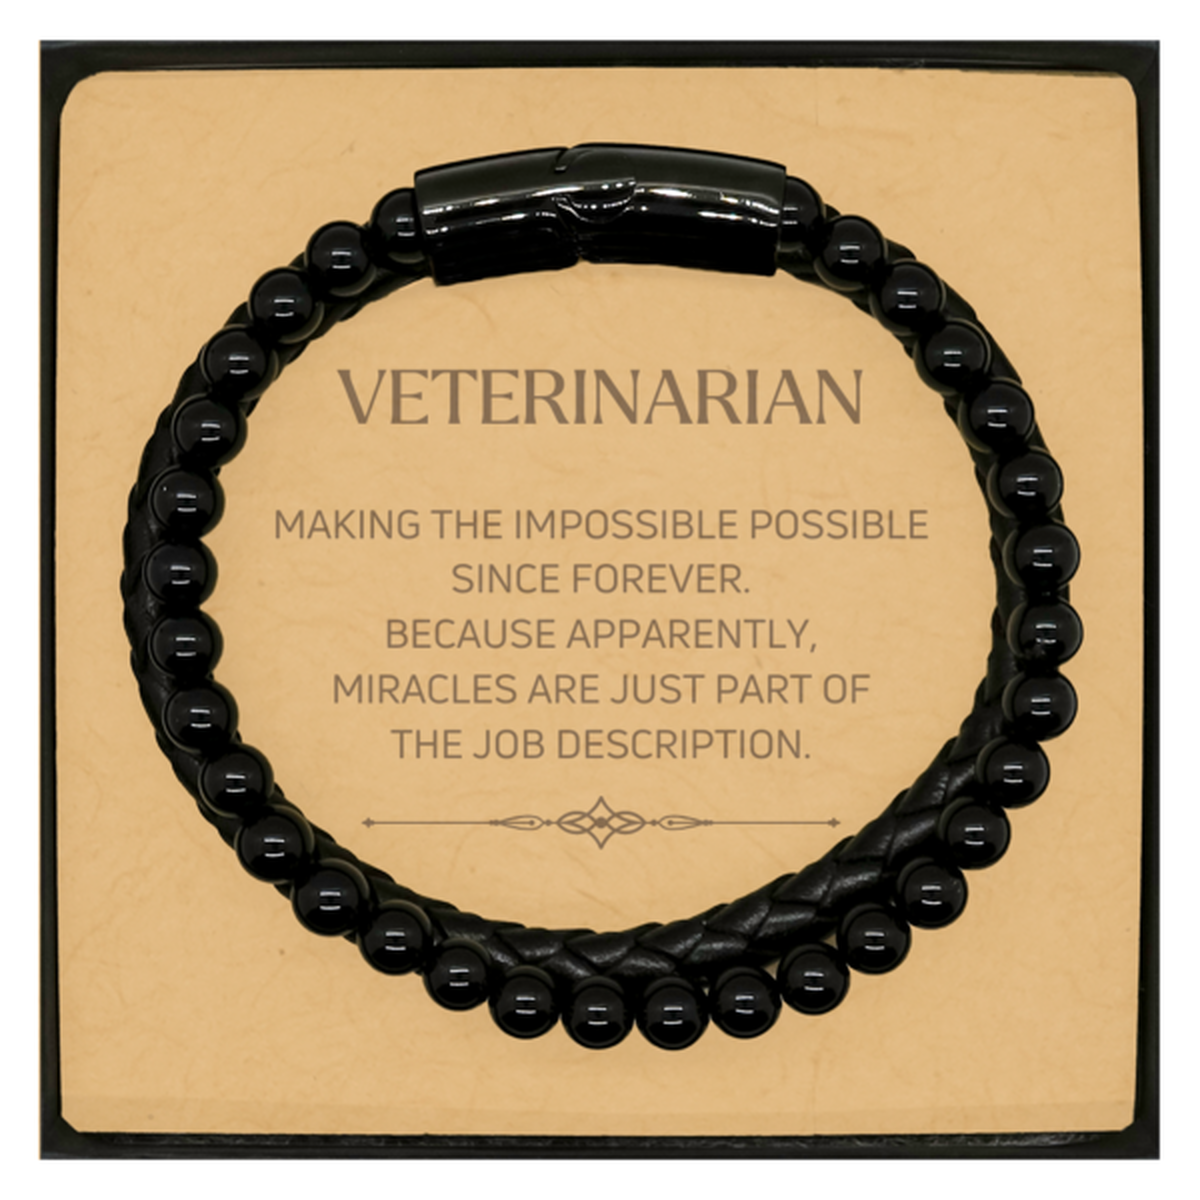 Funny Veterinarian Gifts, Miracles are just part of the job description, Inspirational Birthday Christmas Stone Leather Bracelets For Veterinarian, Men, Women, Coworkers, Friends, Boss